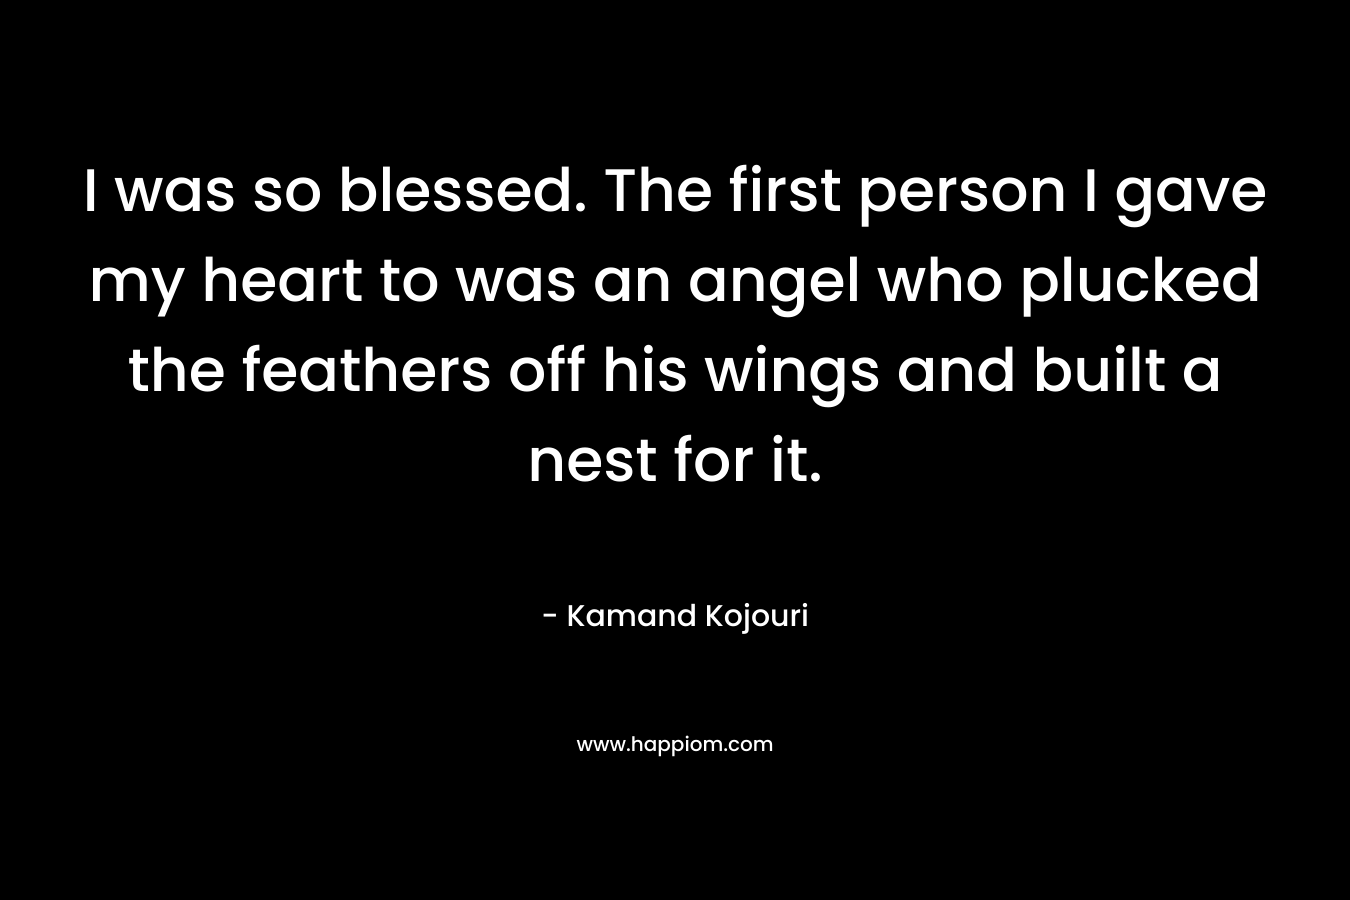 I was so blessed. The first person I gave my heart to was an angel who plucked the feathers off his wings and built a nest for it.